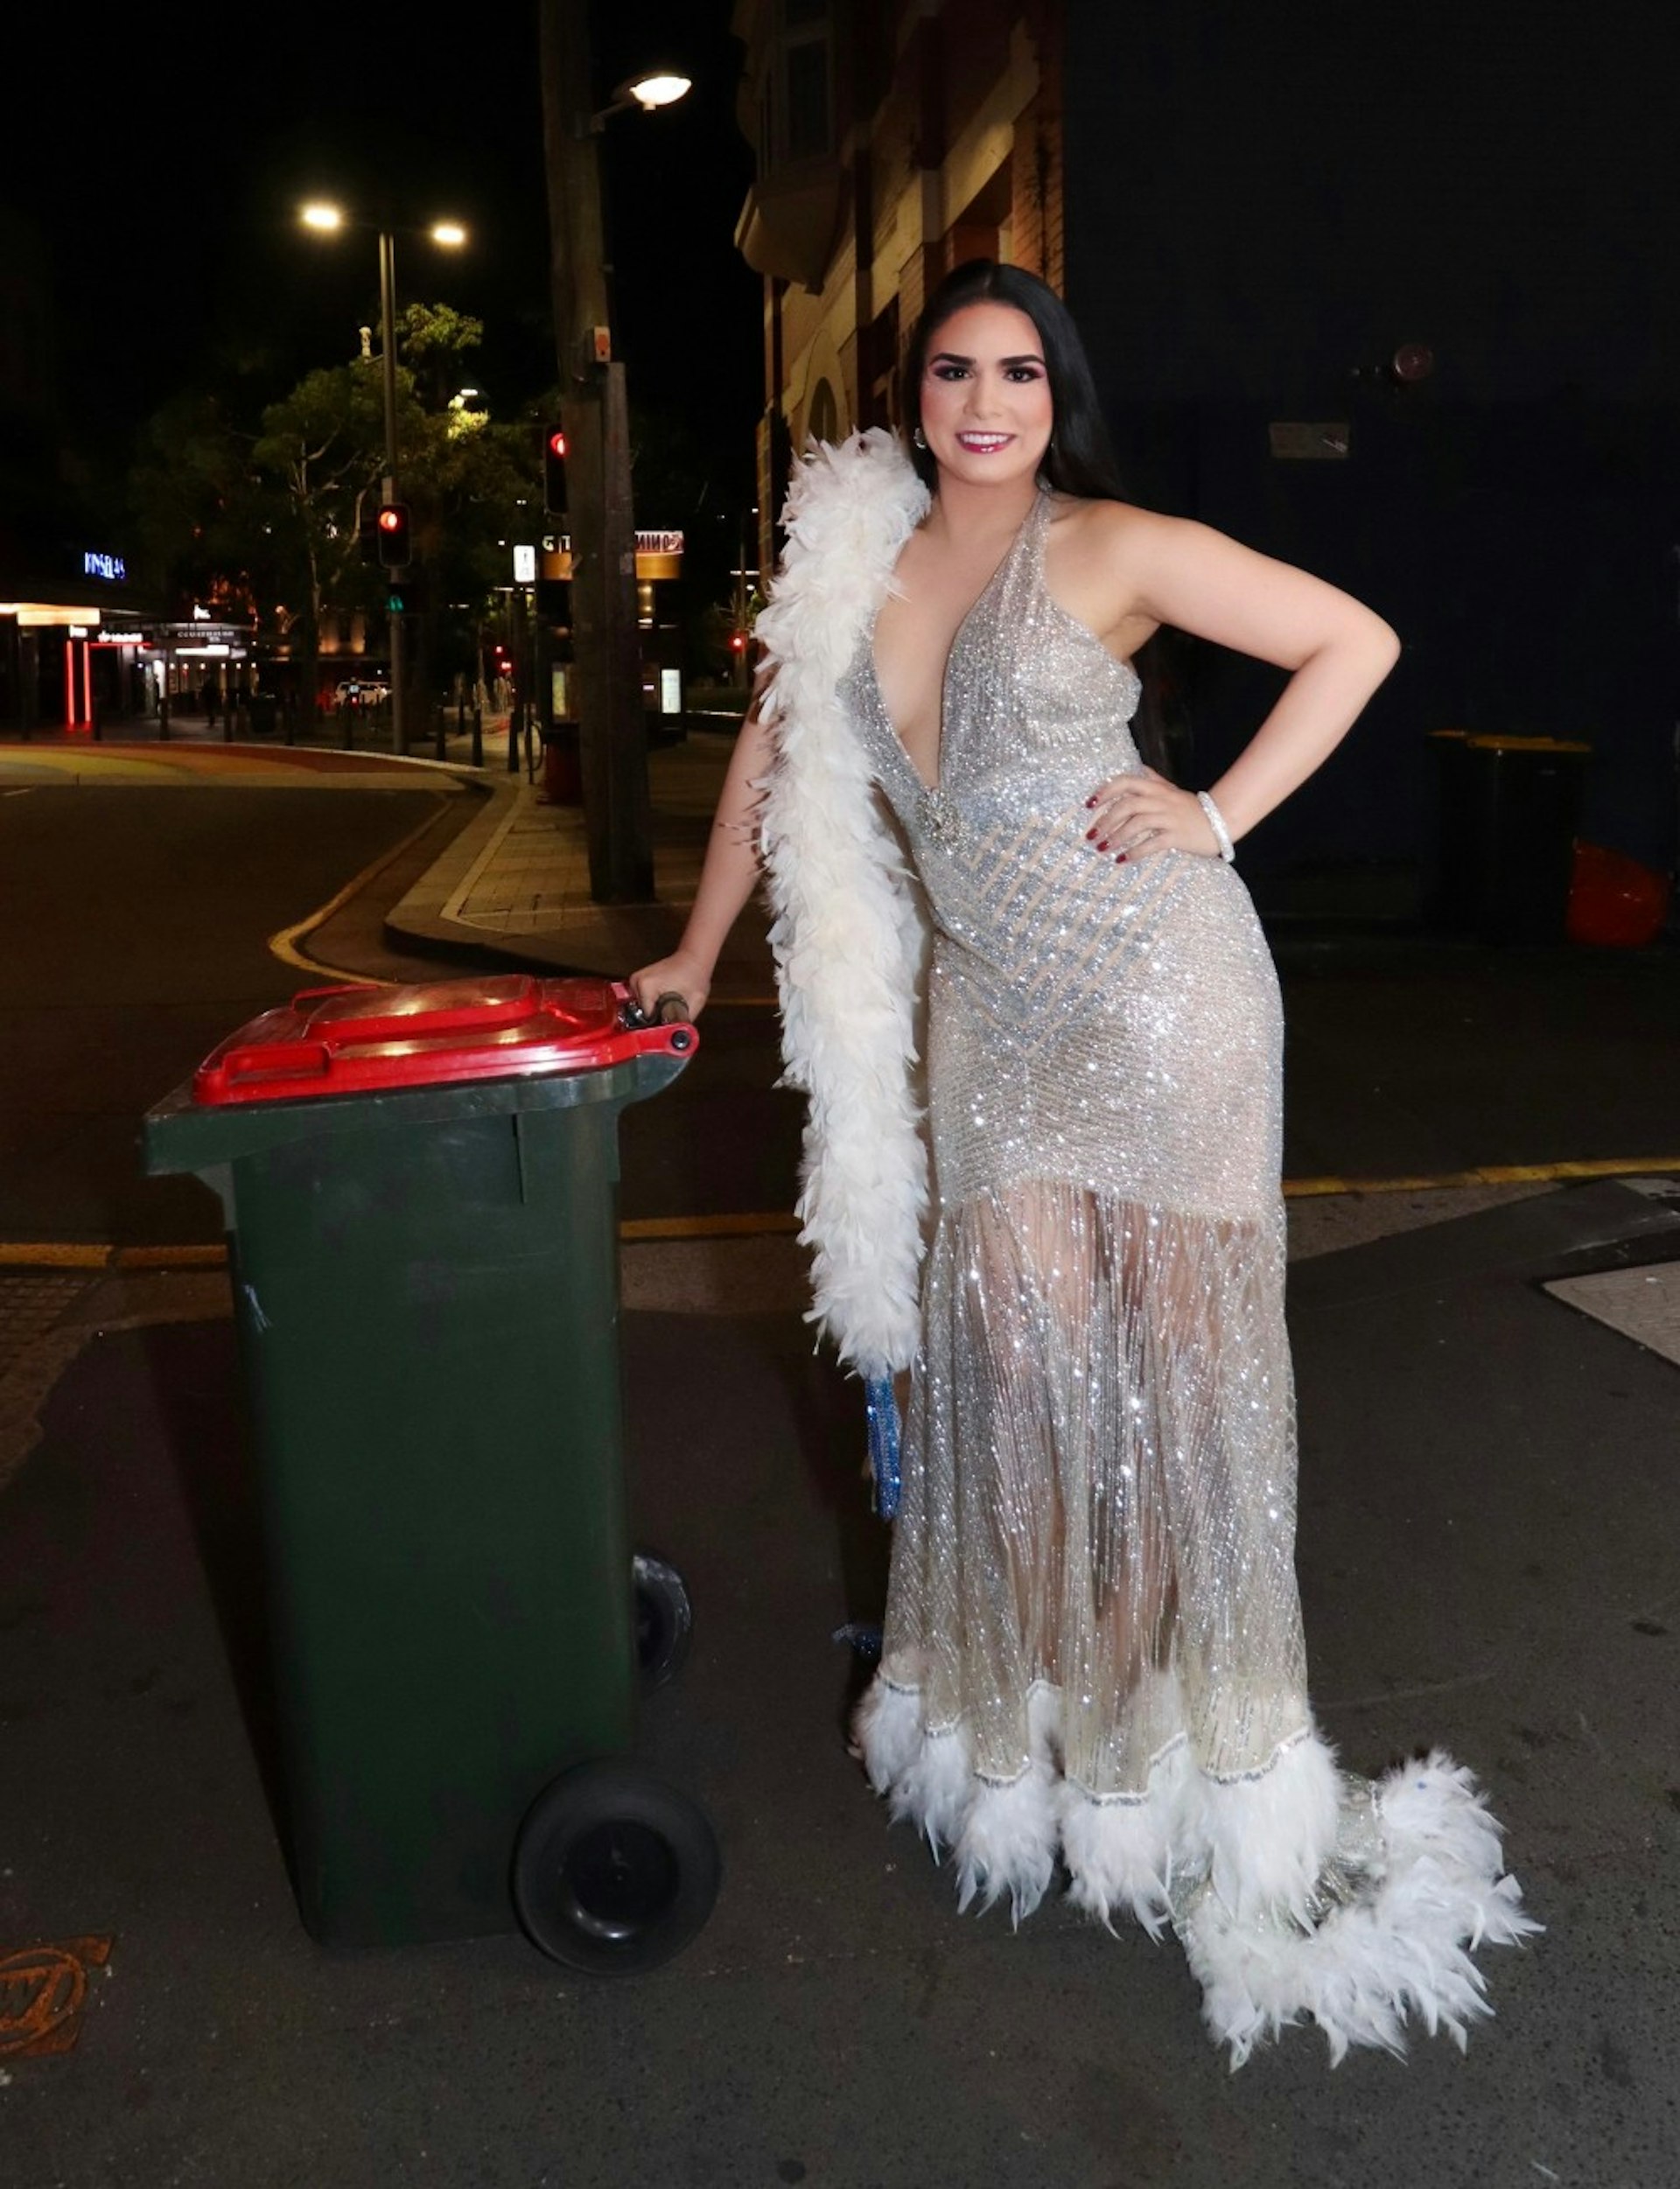 A woman in glam dress putting out her bin